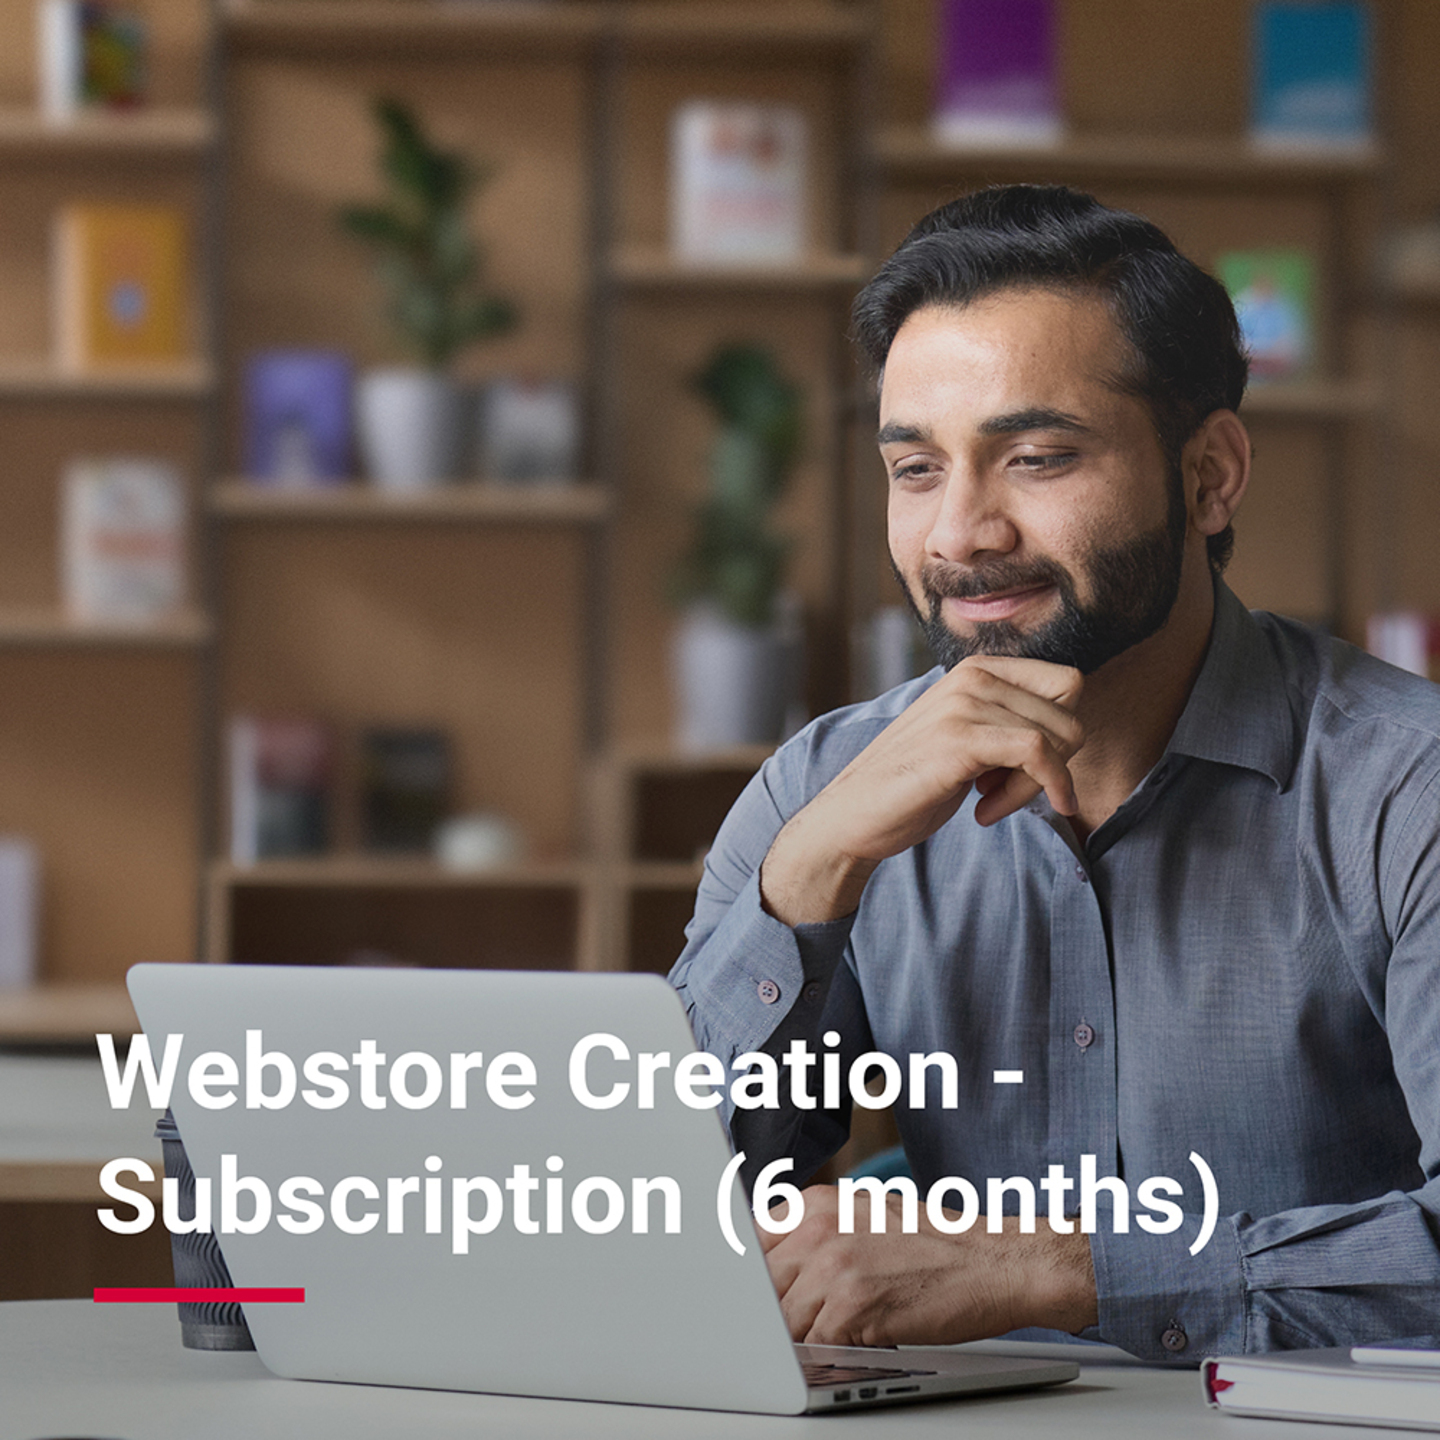 Webstore Creation - Subscription 6 months